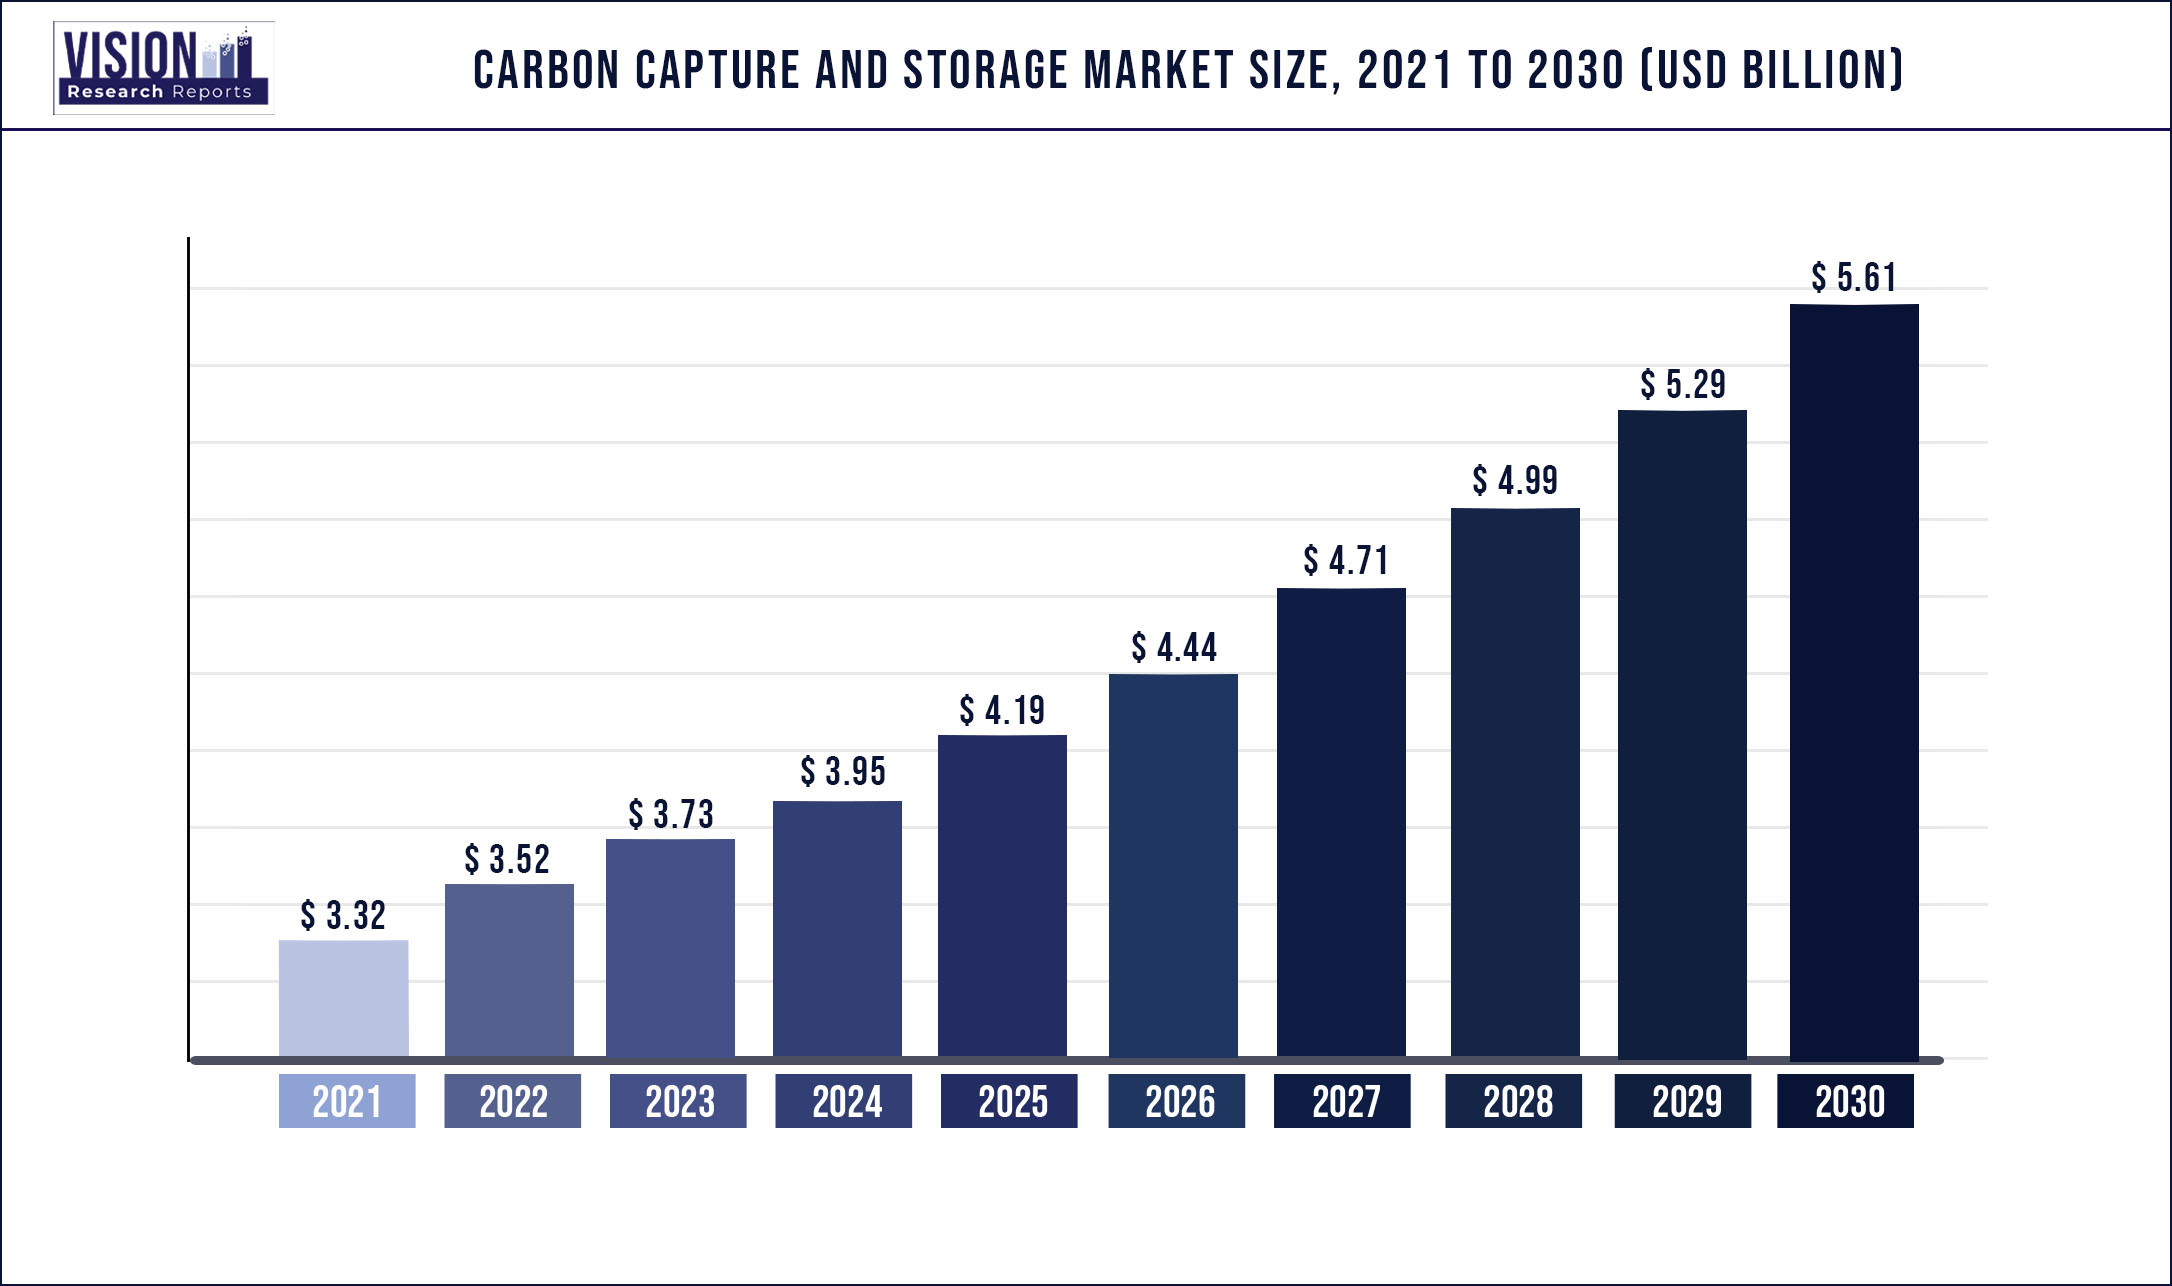 Carbon Capture And Storage Market Size 2021 to 2030